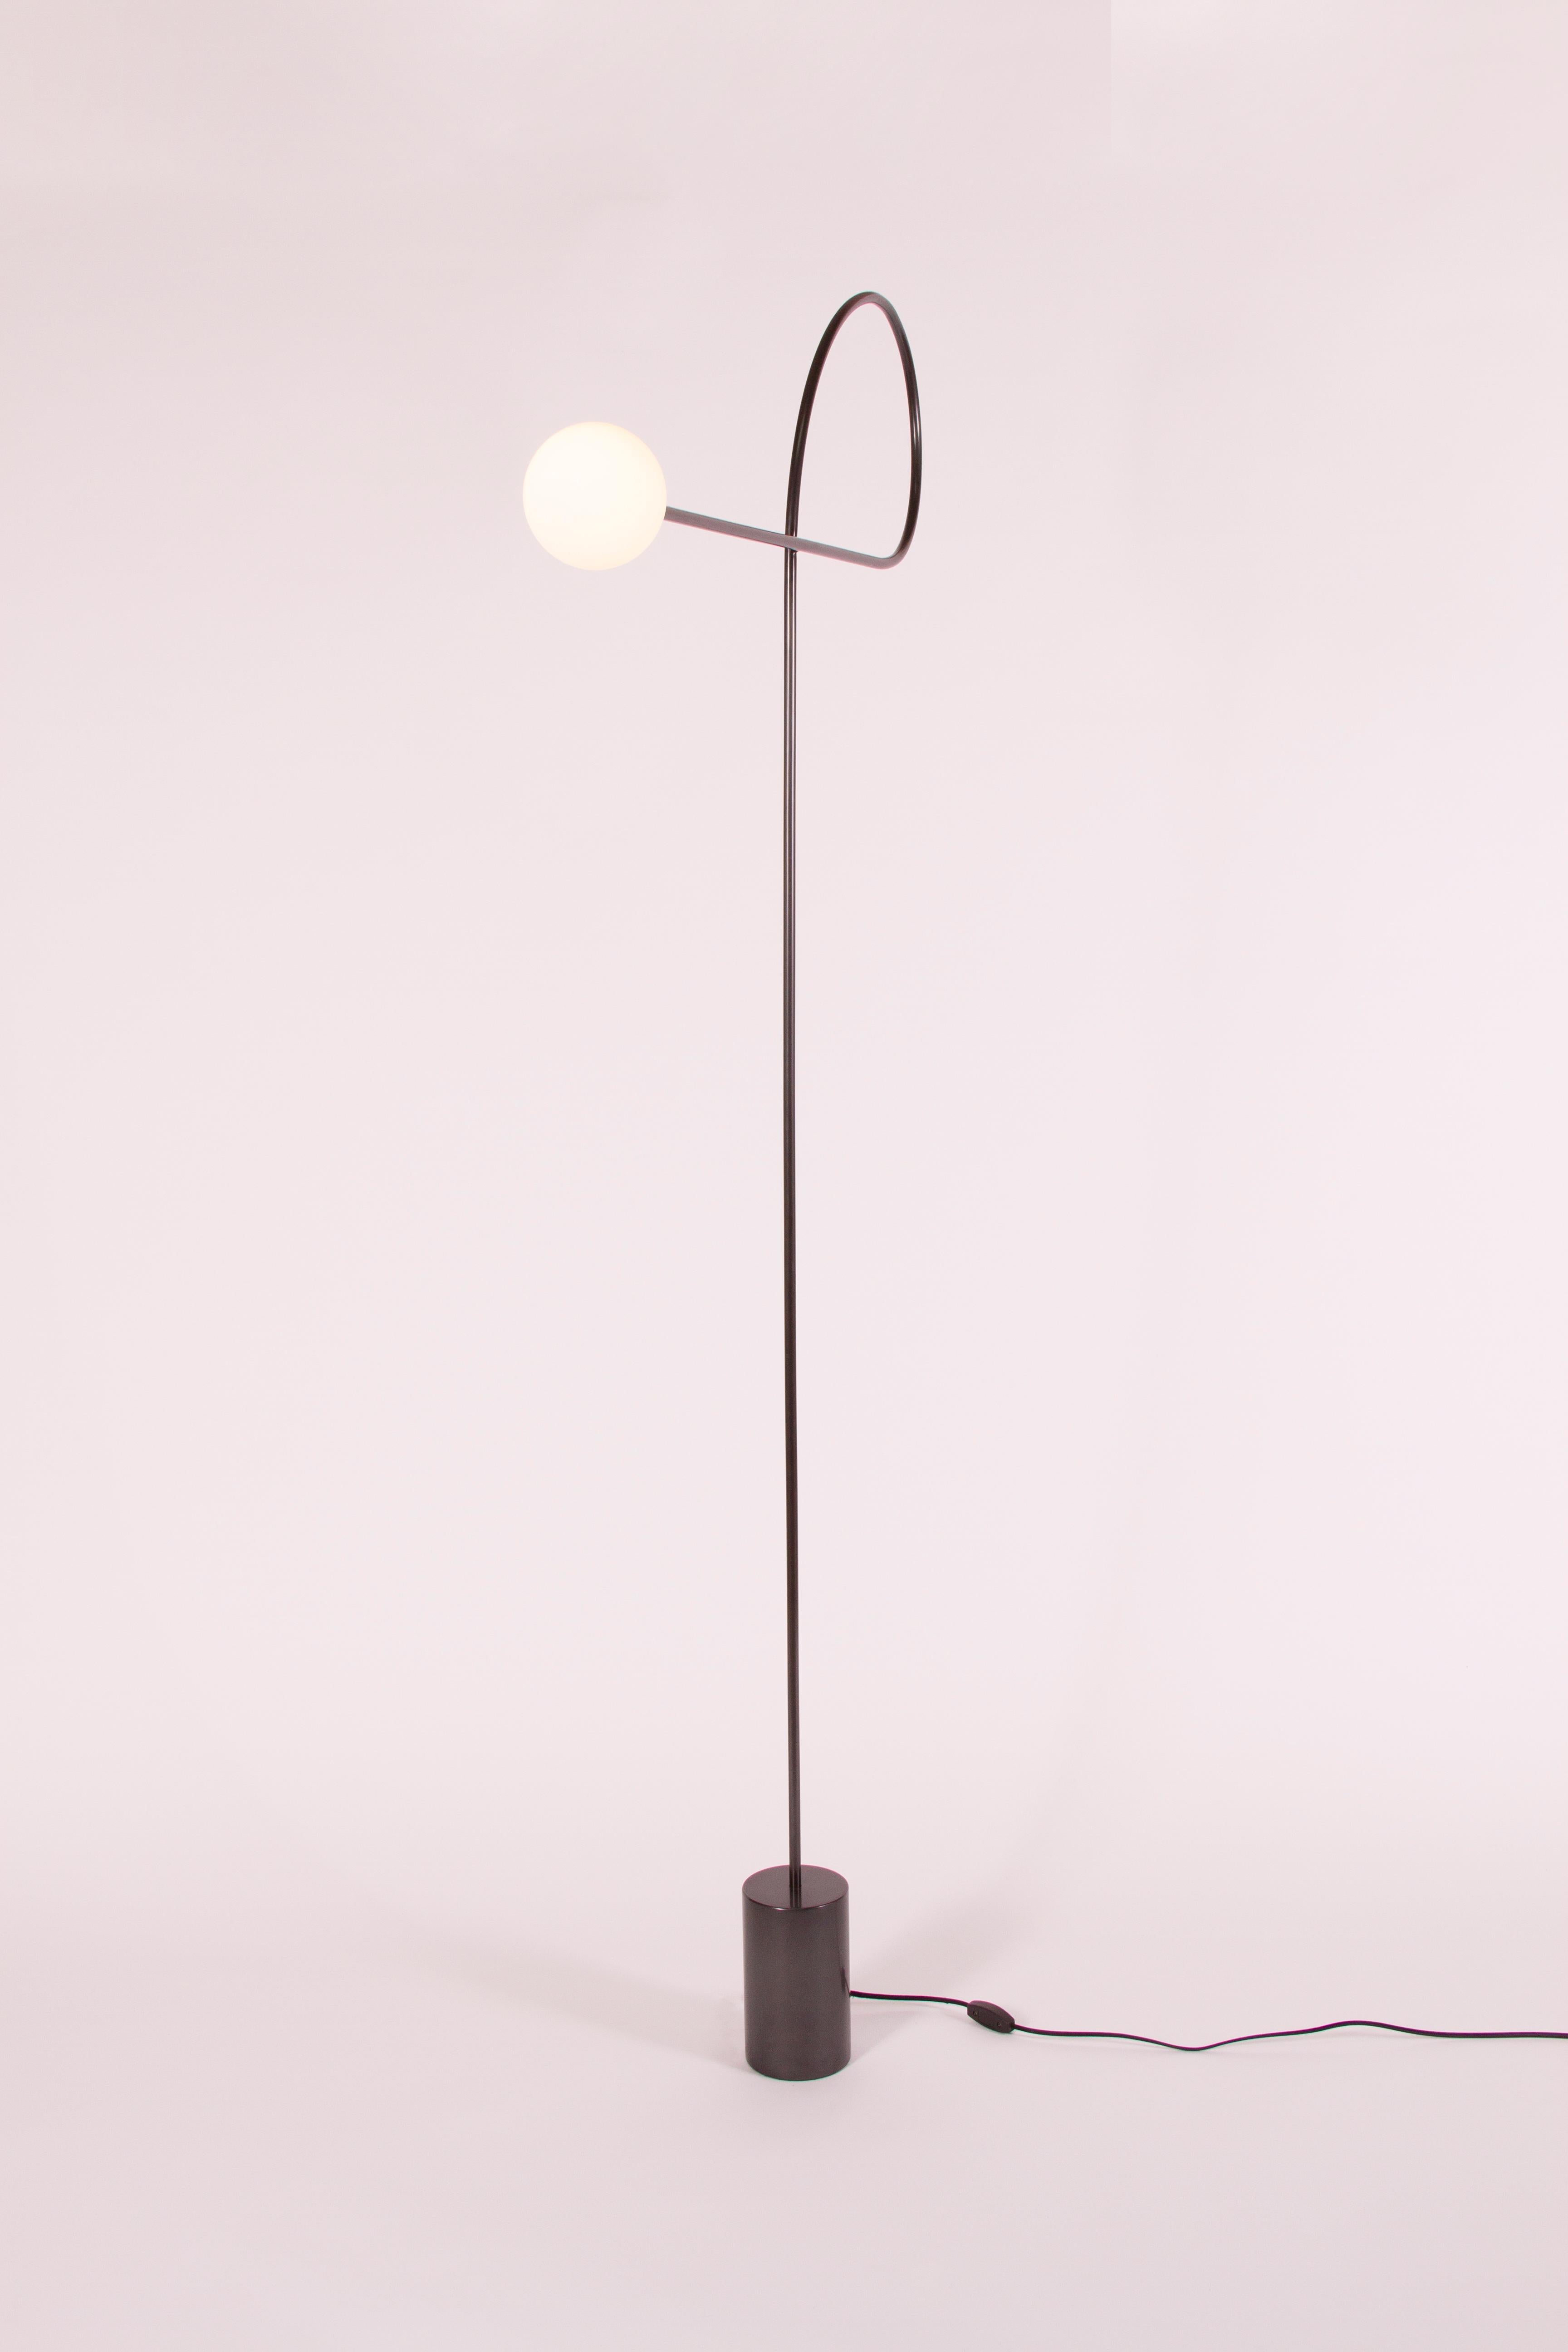 Bow floor lamp by Estudio Persona
Dimensions: W 99 x D 10.2 x H 185.5 cm
Materials: Steel, hand blown glass.

Floor lamp in blackened steel with hand blown glass.
Customizations available.

Estudio Persona was created by Emiliana Gonzalez and